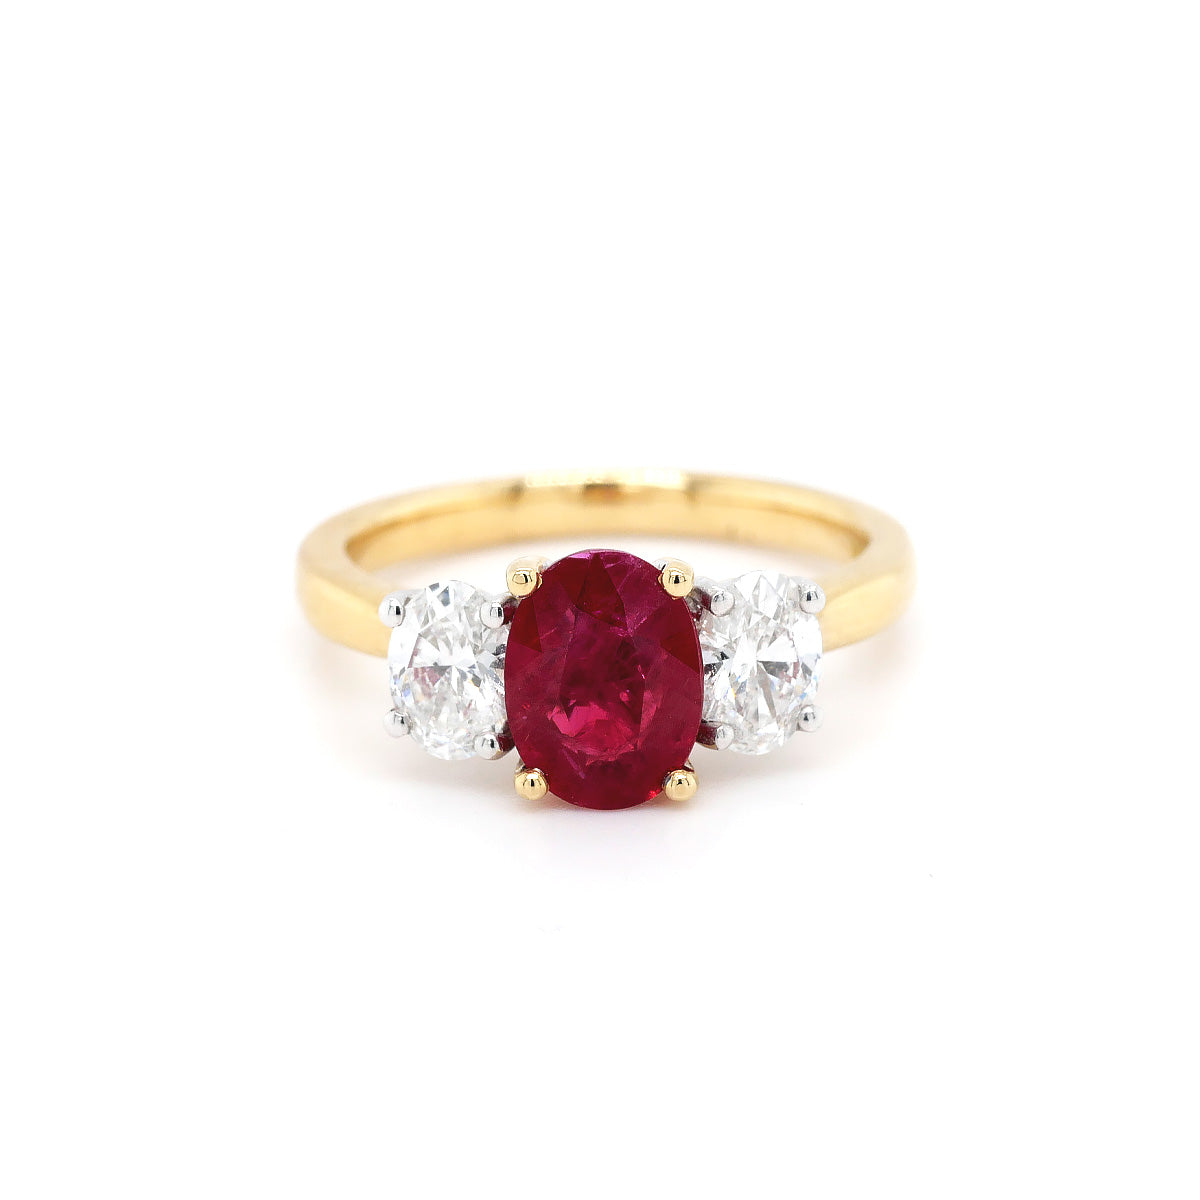 18ct Yellow Gold 1.57ct Ruby & 0.76ct Diamond 3-Stone Ring - Size N